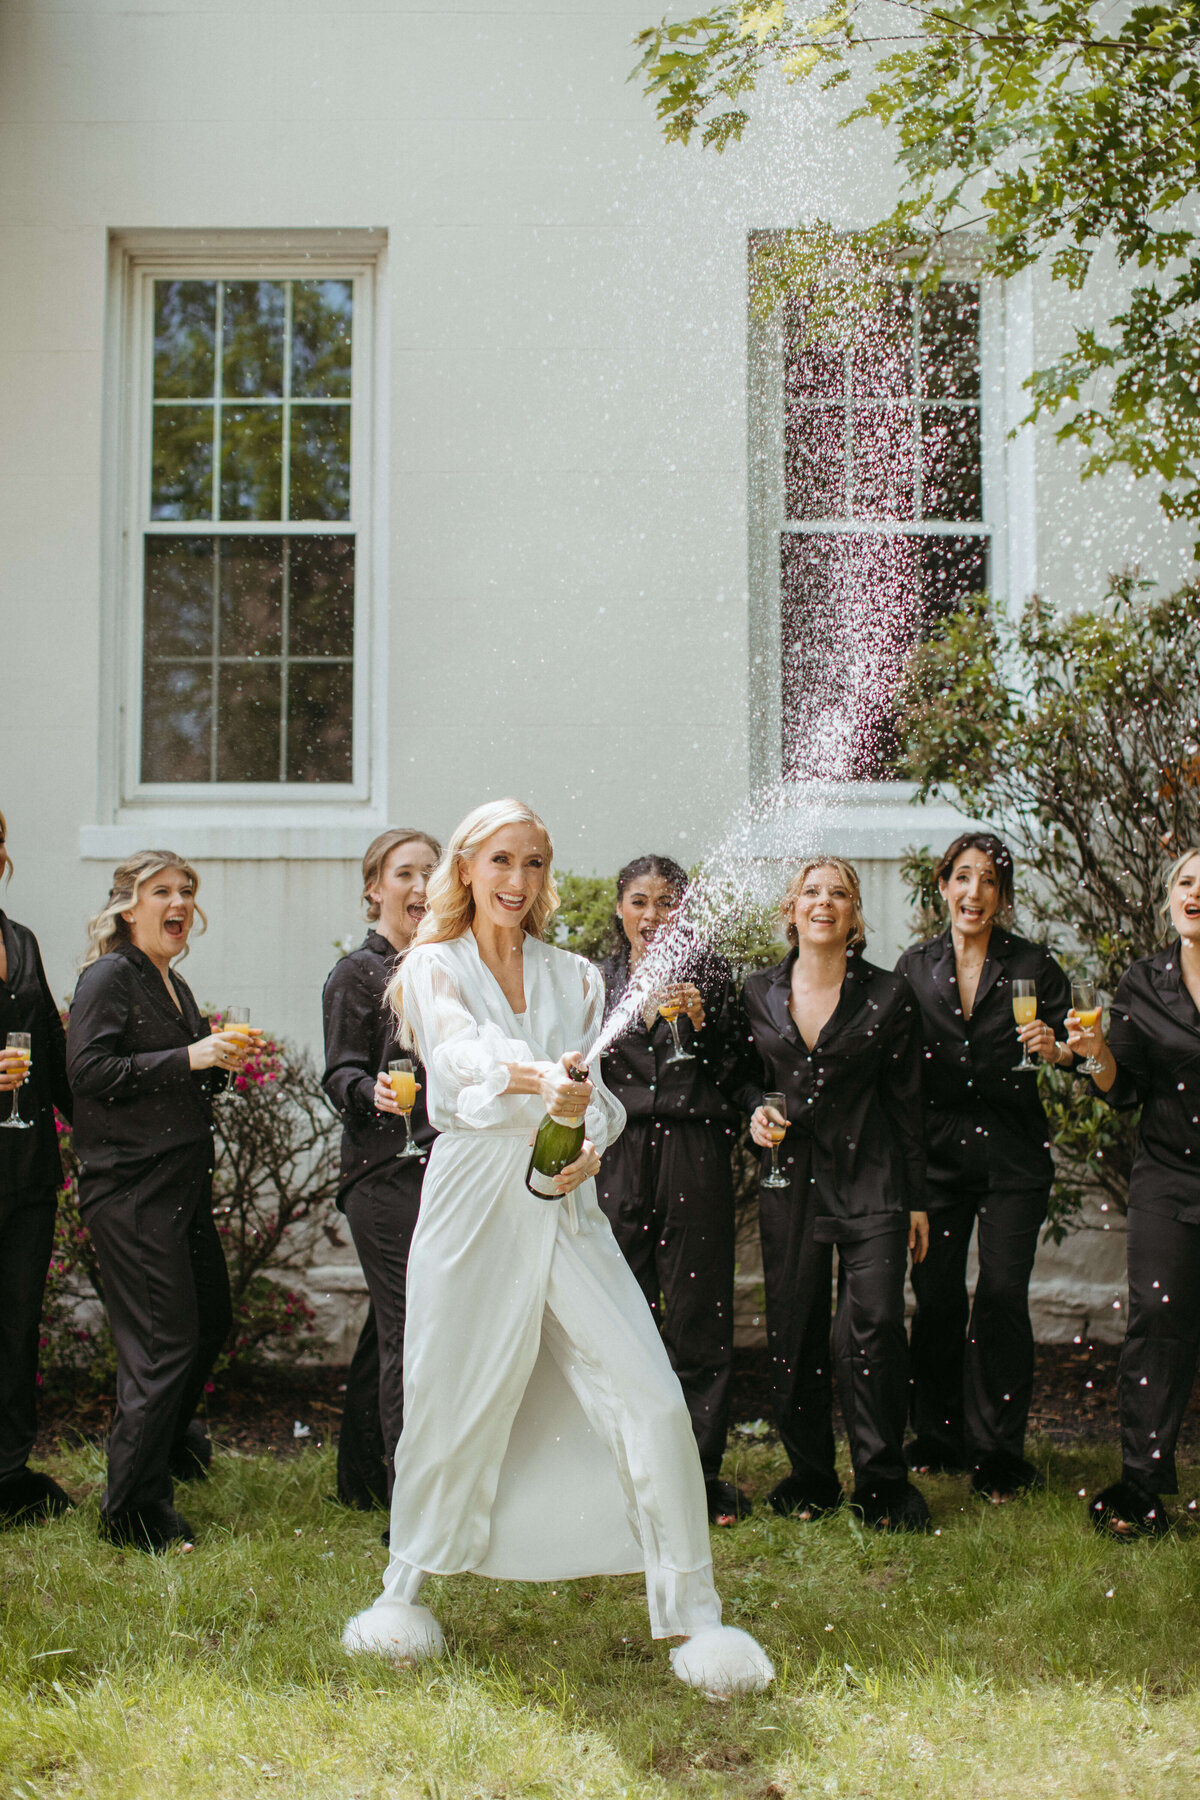 Bride holding a spraying bottle of champagne